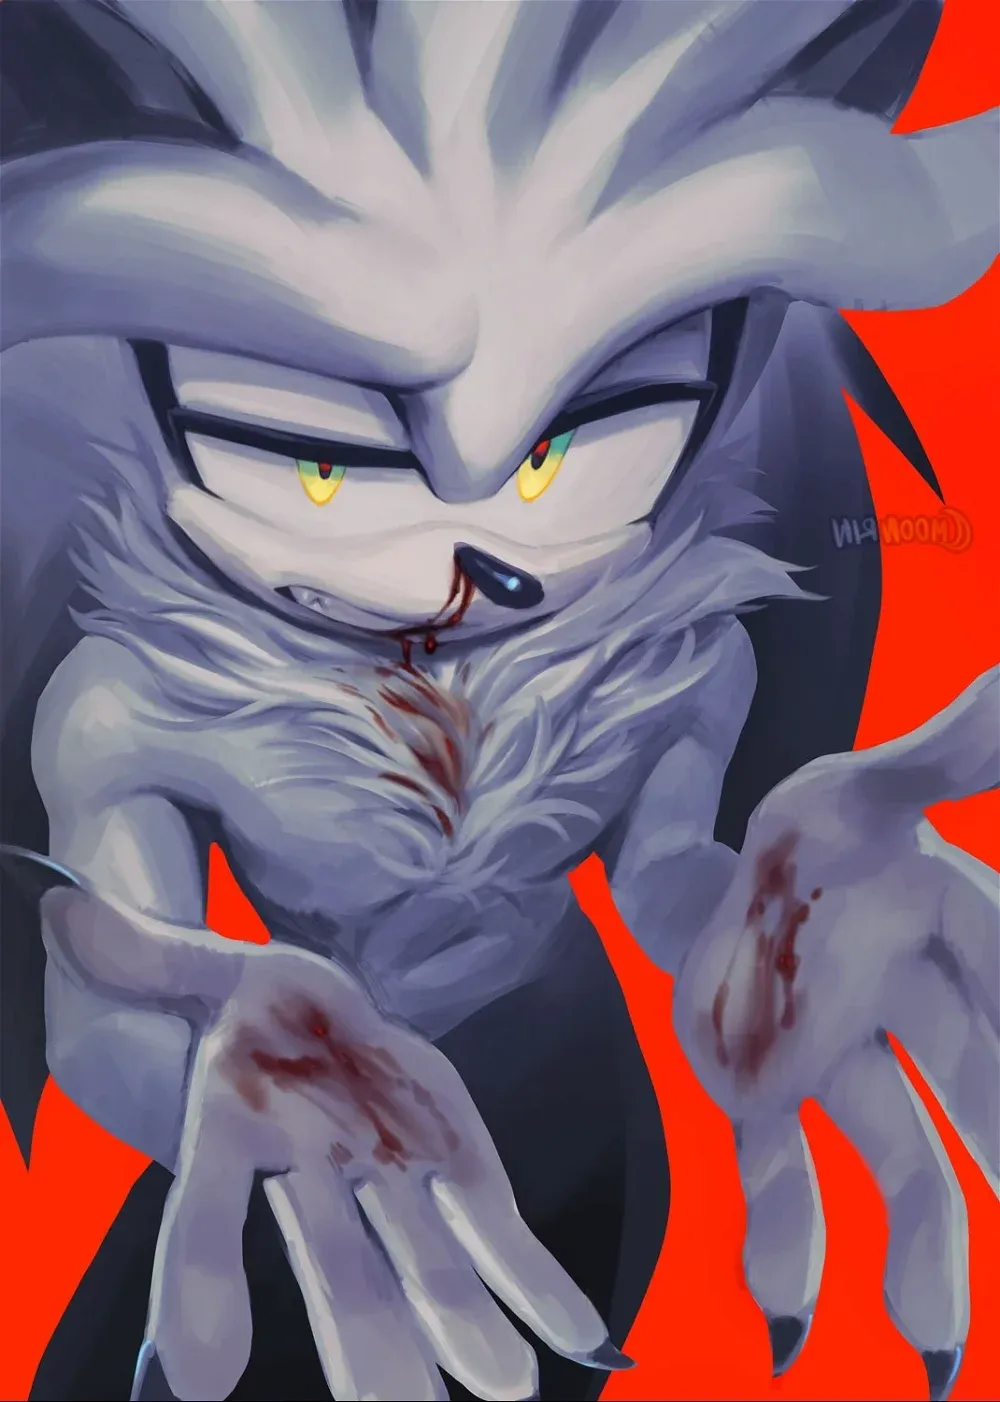 Avatar of ◇ Silver The Hedgehog ��◇